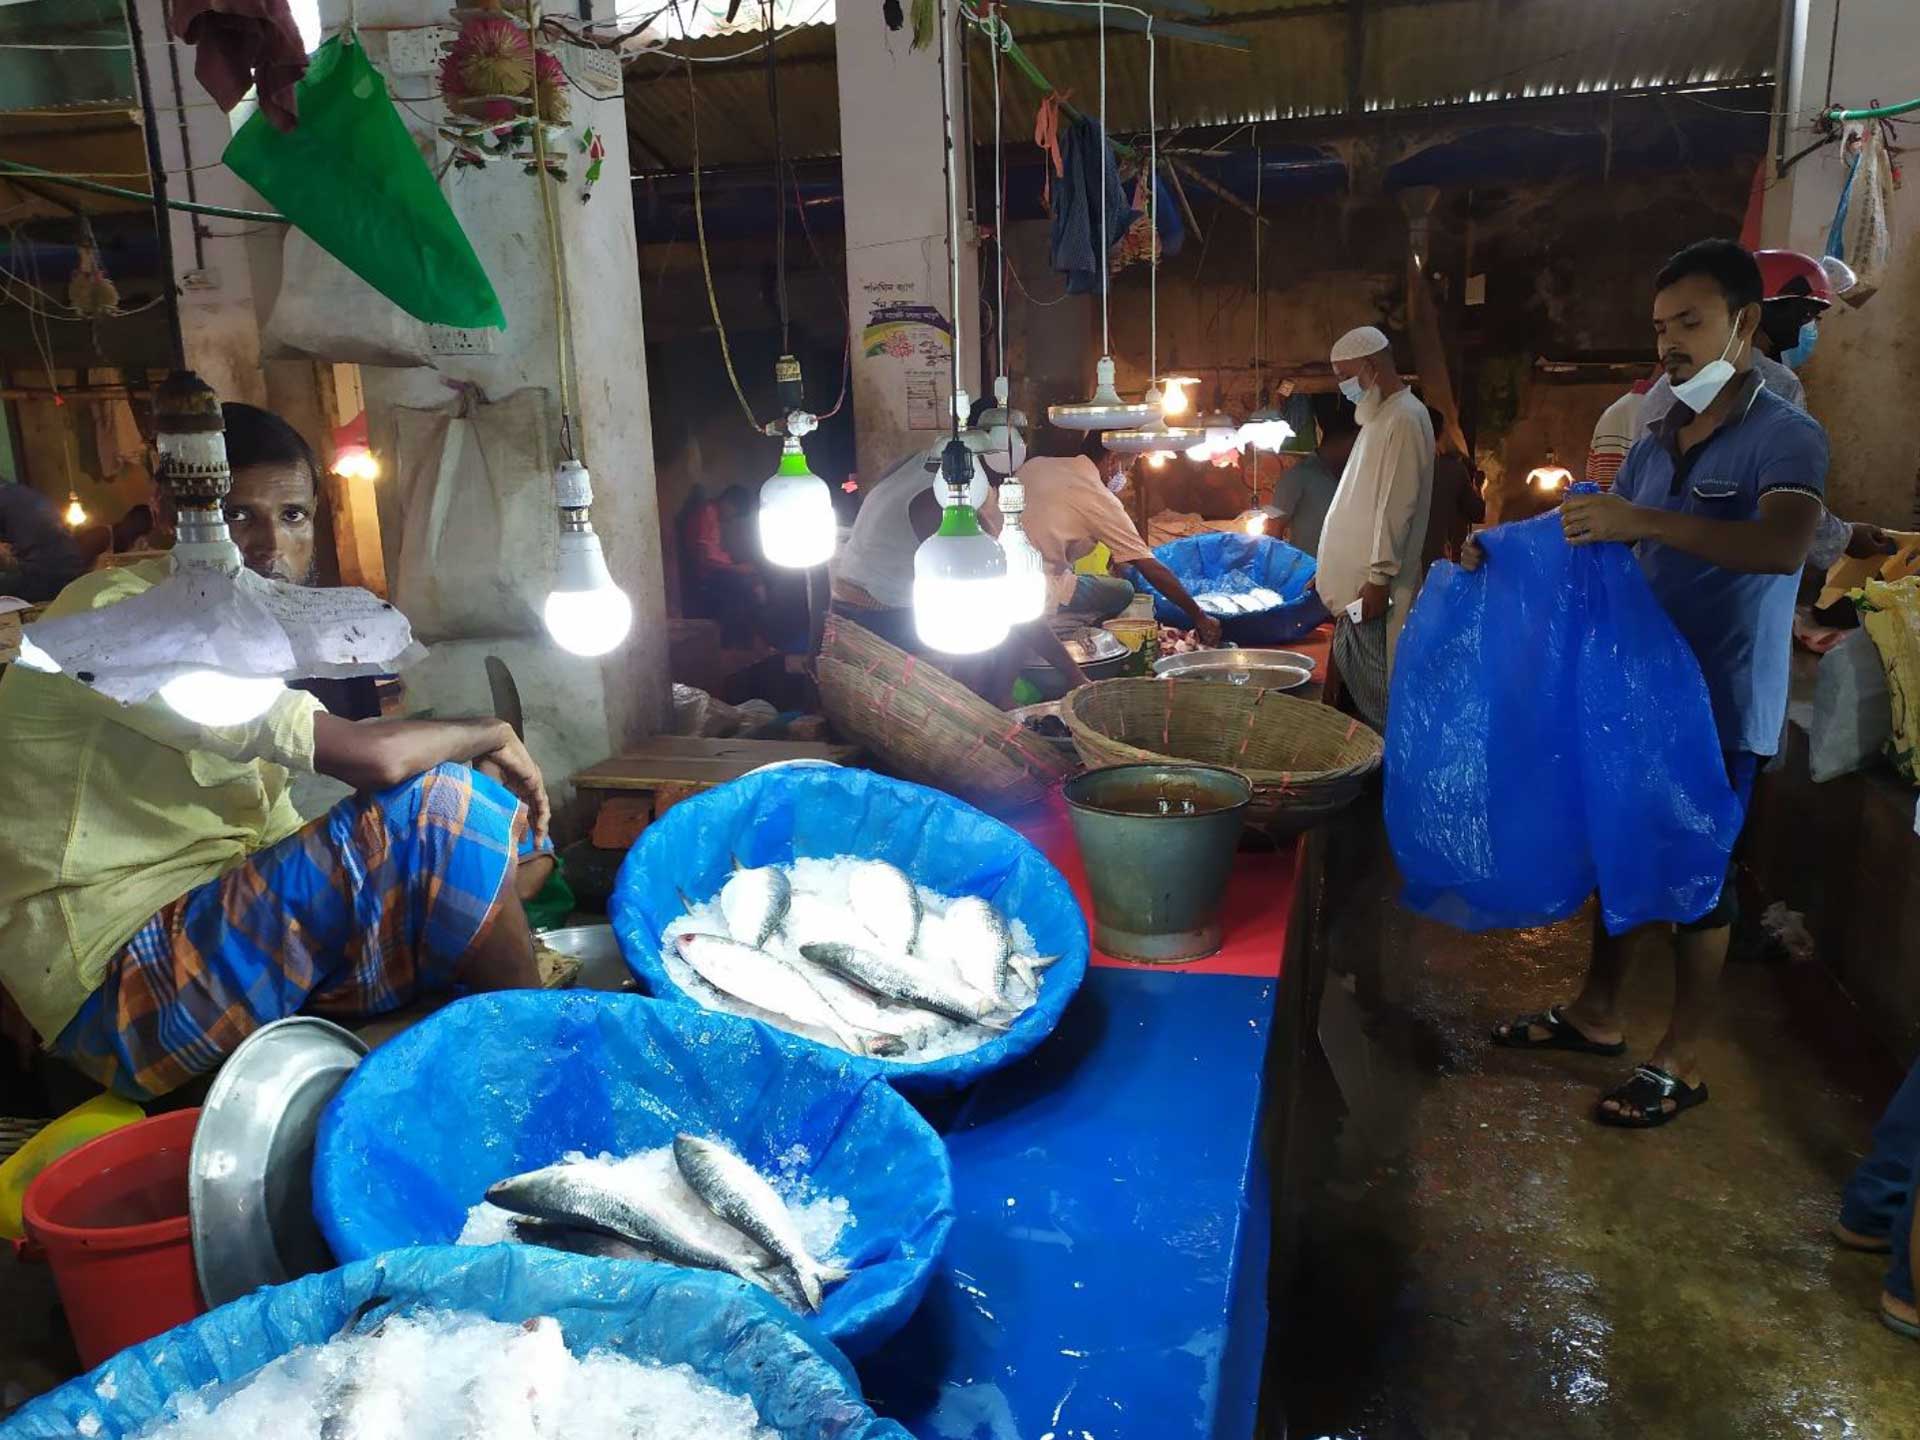 Fish retail market in Mymensingh city with few customers during the COVID-19 pandemic (August 8, 2020) - Photo: M. Mahfujul Haque.